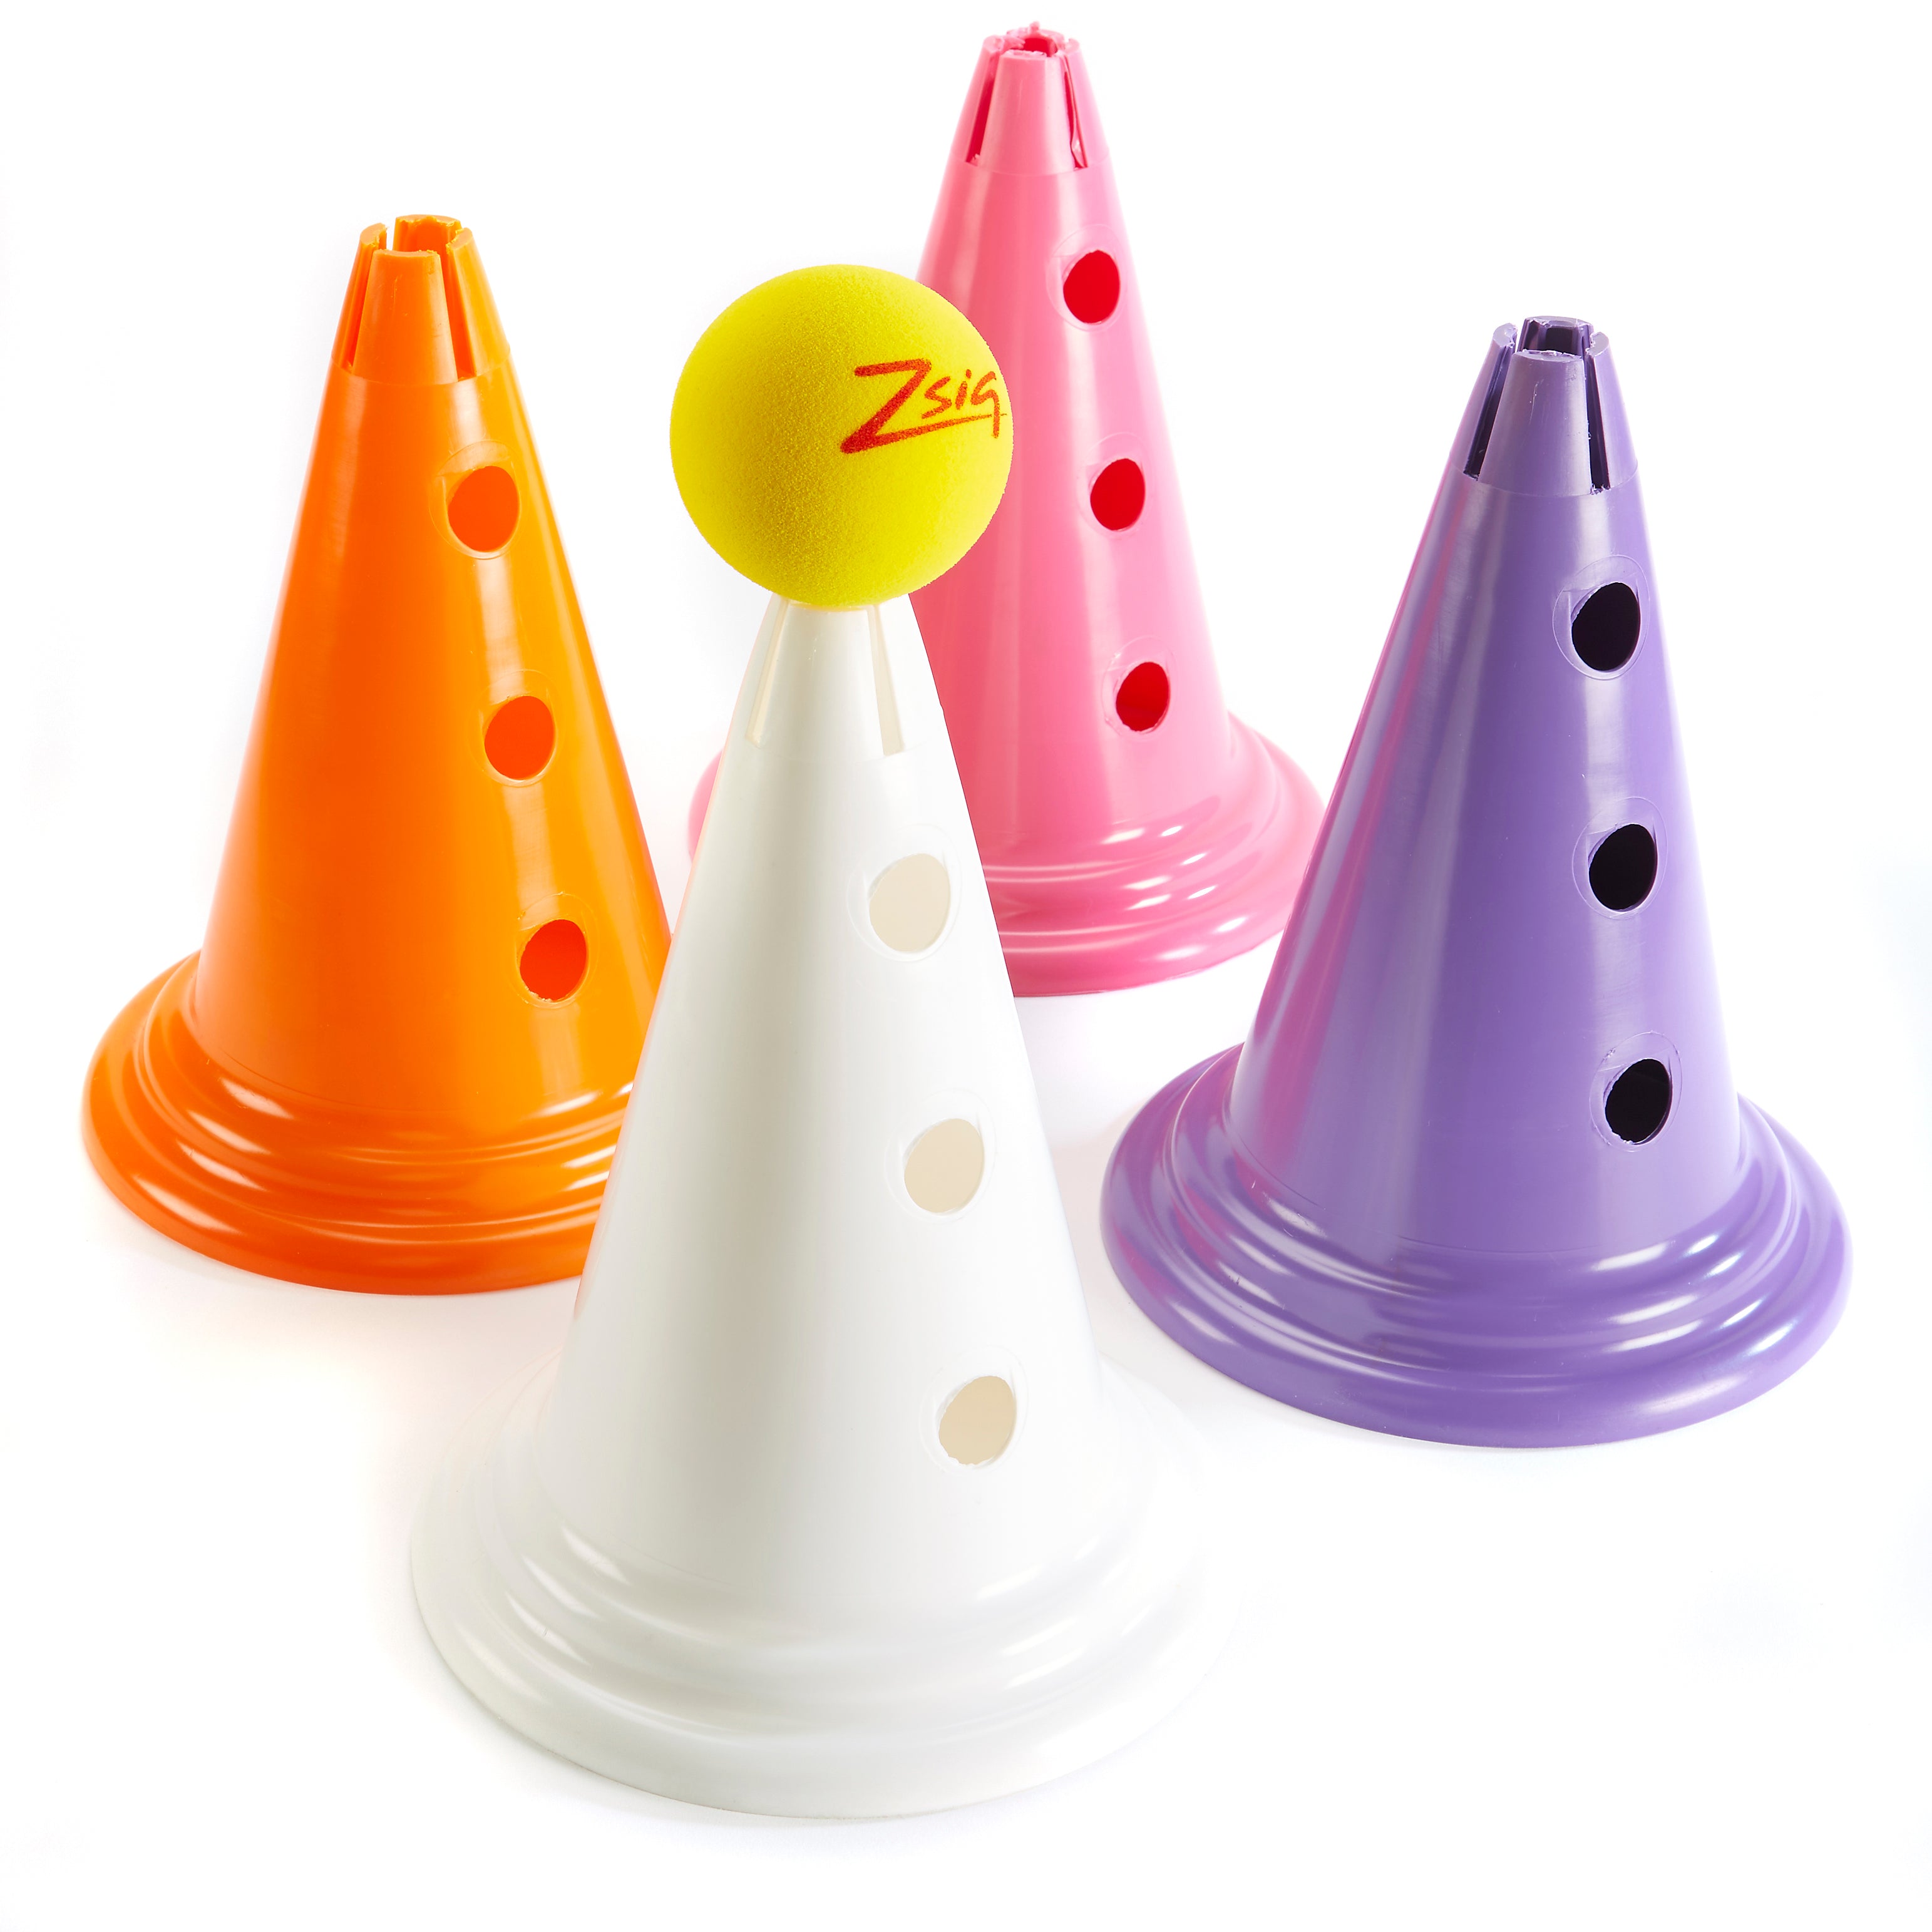 4 Mini Cones in pink, purple, orange and white, each with 3 support holes for horizontal poles, and top hole to hold a vertical pole - or a tennis ball.